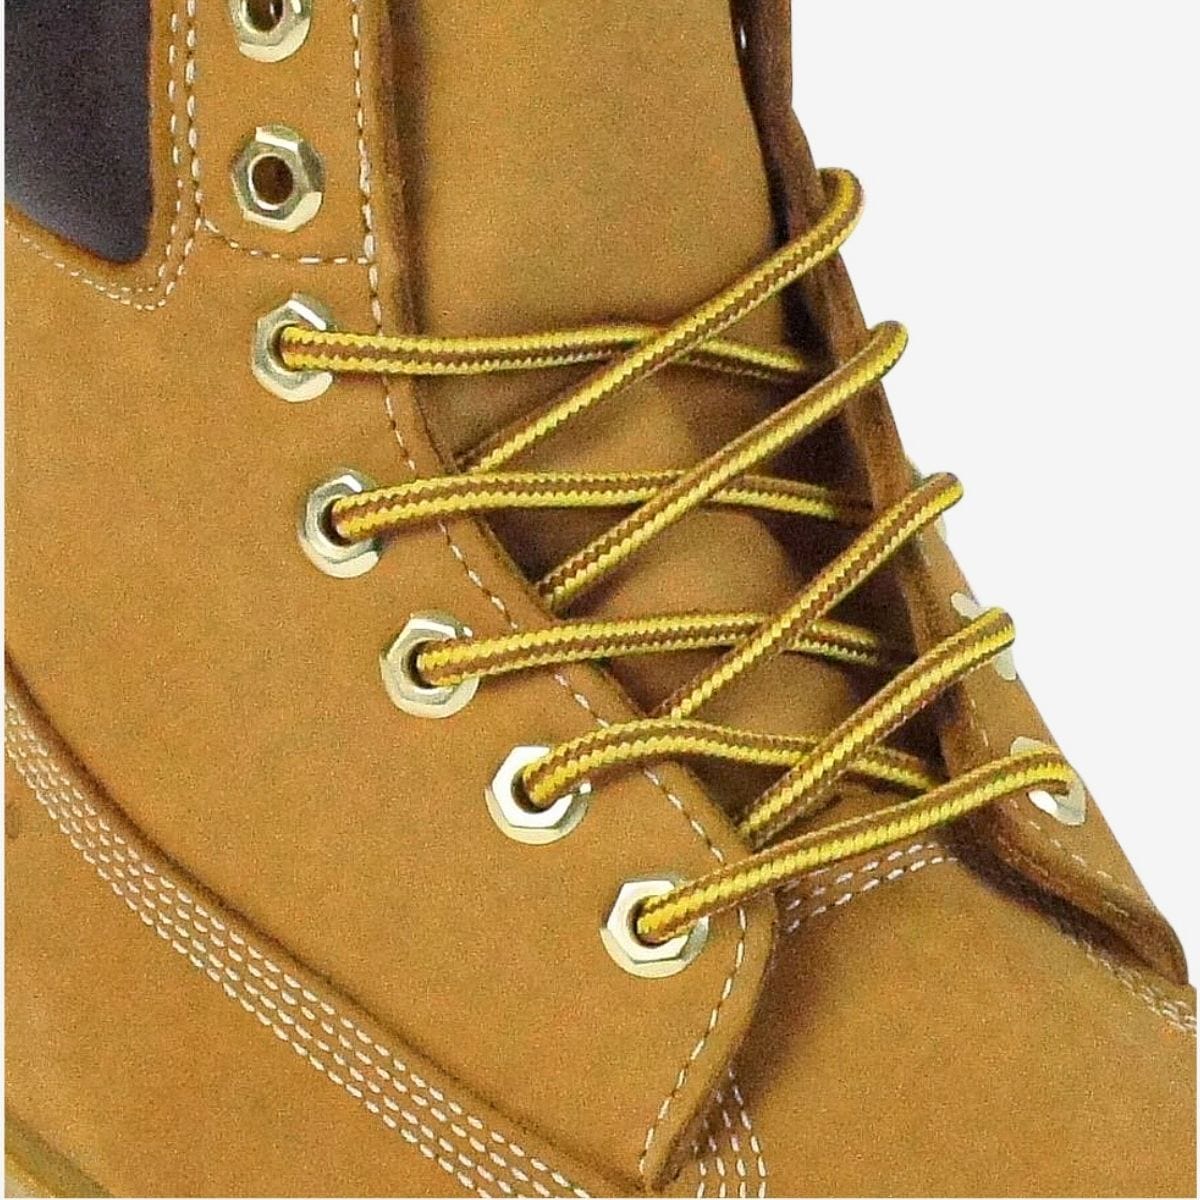 shop-round-shoelaces-online-in-golden-yellow-and-brown-for-boots-sneakers-and-running-shoes